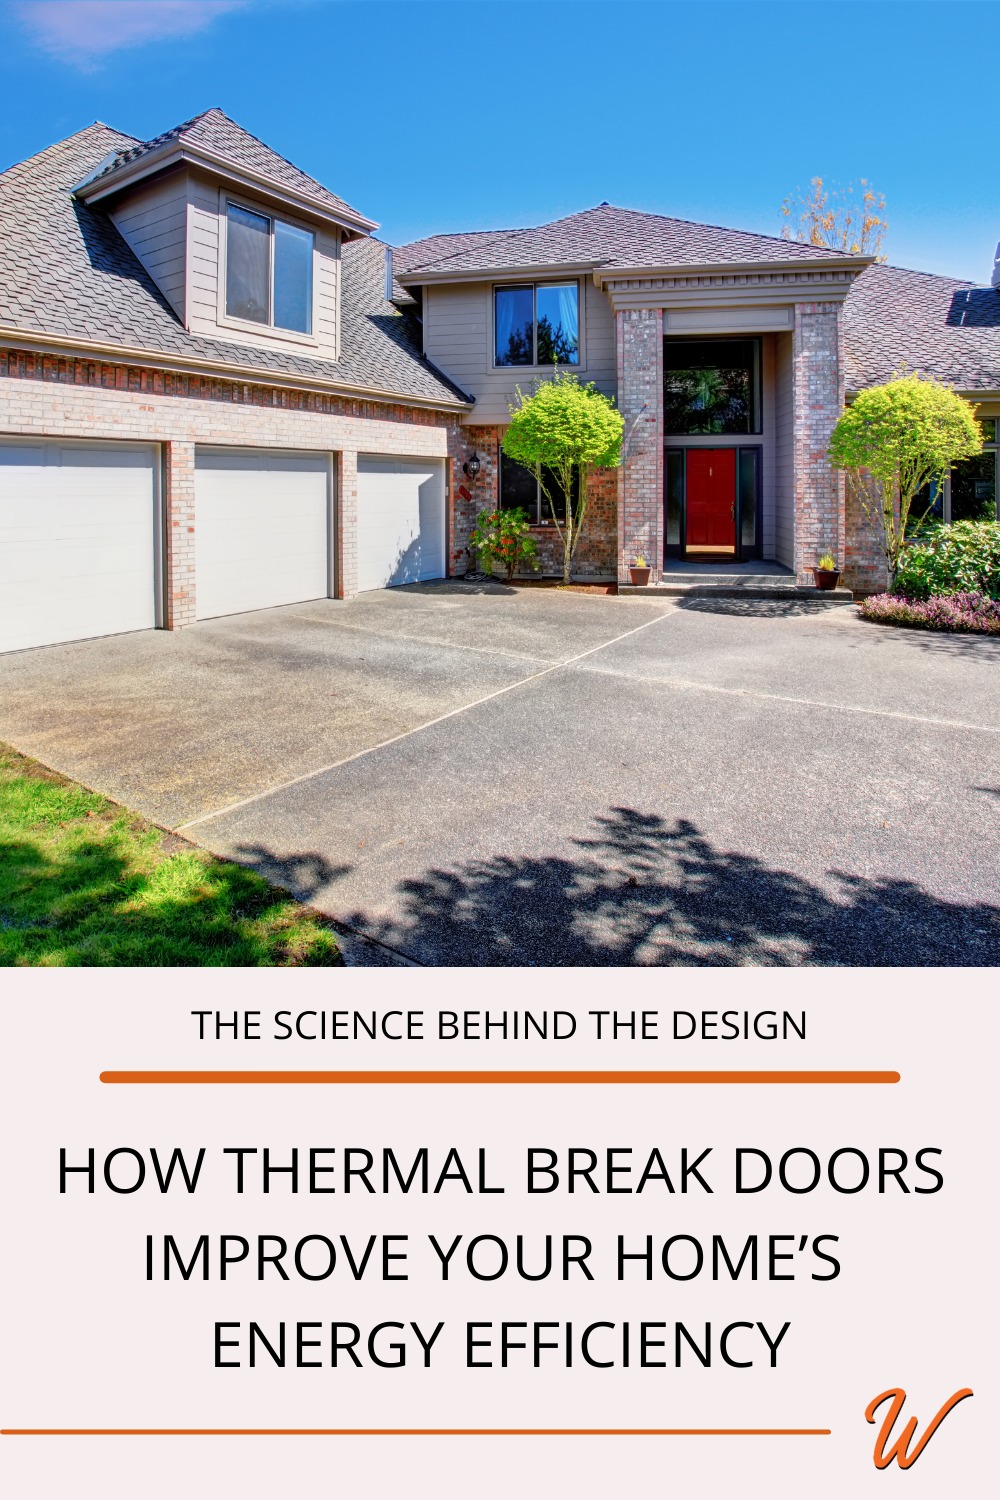 A Spanish style home with a three car garage captioned with "The science behind the design: How thermal break doors improve your home's energy efficiency"